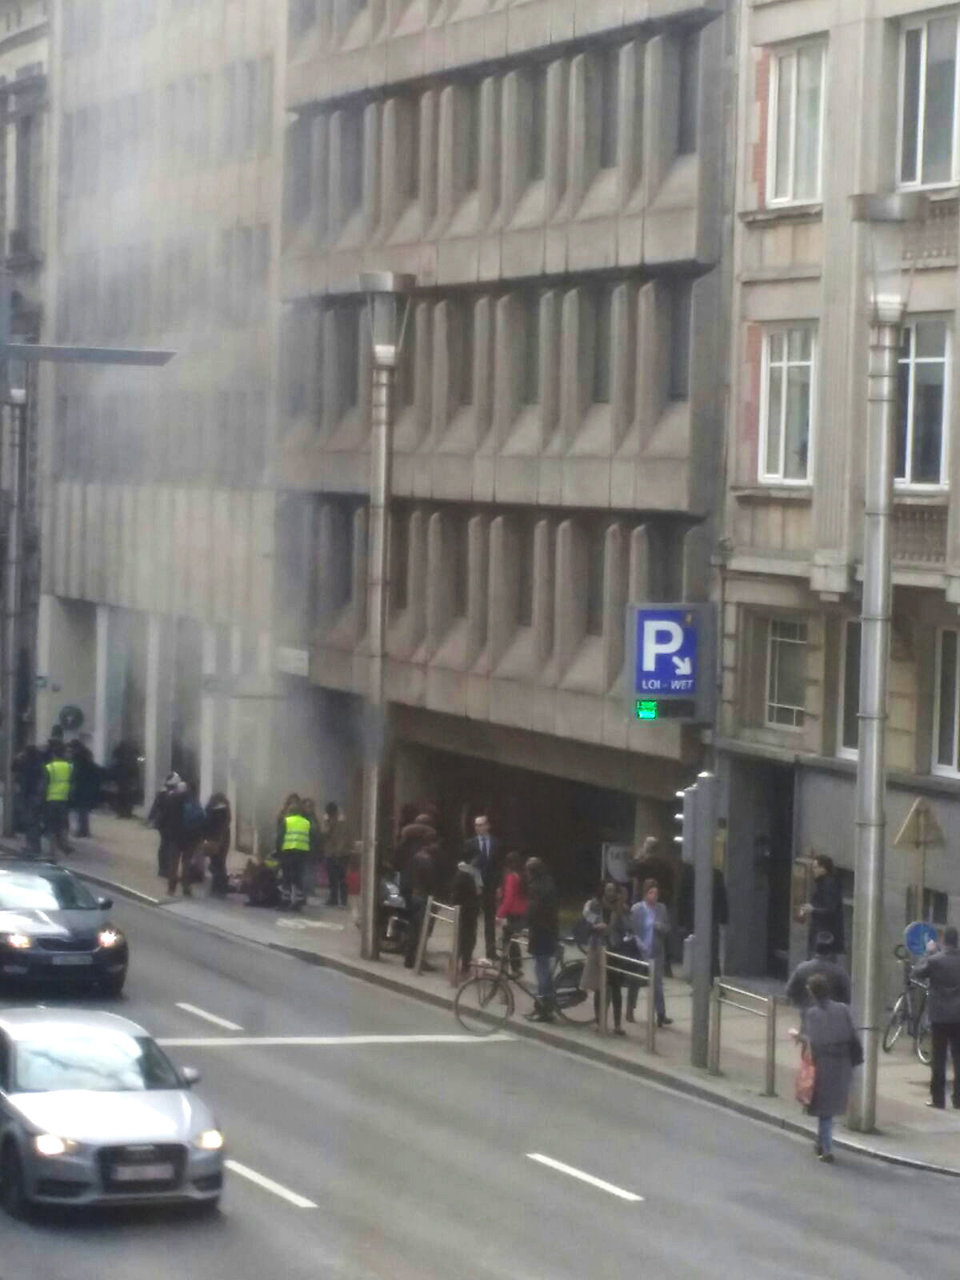 A picture taken on March 22, 2016 shows smoke rising from the Maalbeek underground, in Brussels, following a blast at the station close to the capital's European quarter.  The Brussels metro service was being shut down on March 22, its operator said. The measure came after a rush-hour explosion at Maalbeek station with TV images showing black smoke pouring from the station entrance.  / AFP / Belga / Seppe KNAPEN / Belgium OUT        (Photo credit should read SEPPE KNAPEN/AFP/Getty Images)